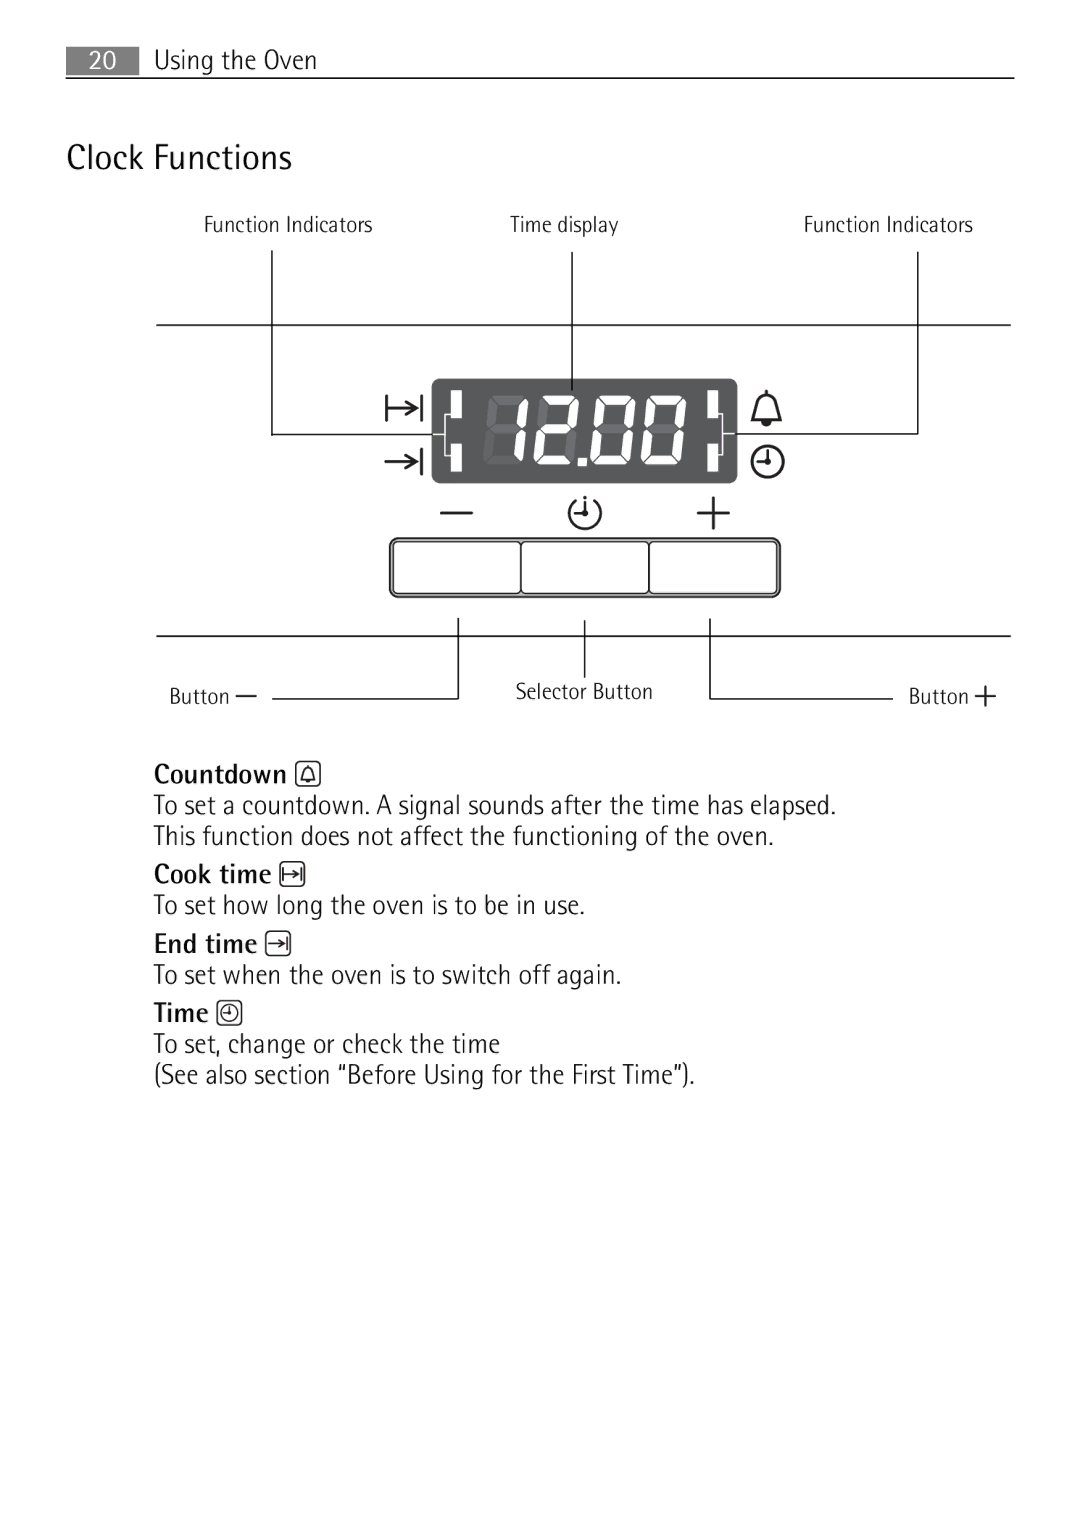 Electrolux 41056VH user manual Clock Functions, Countdown 